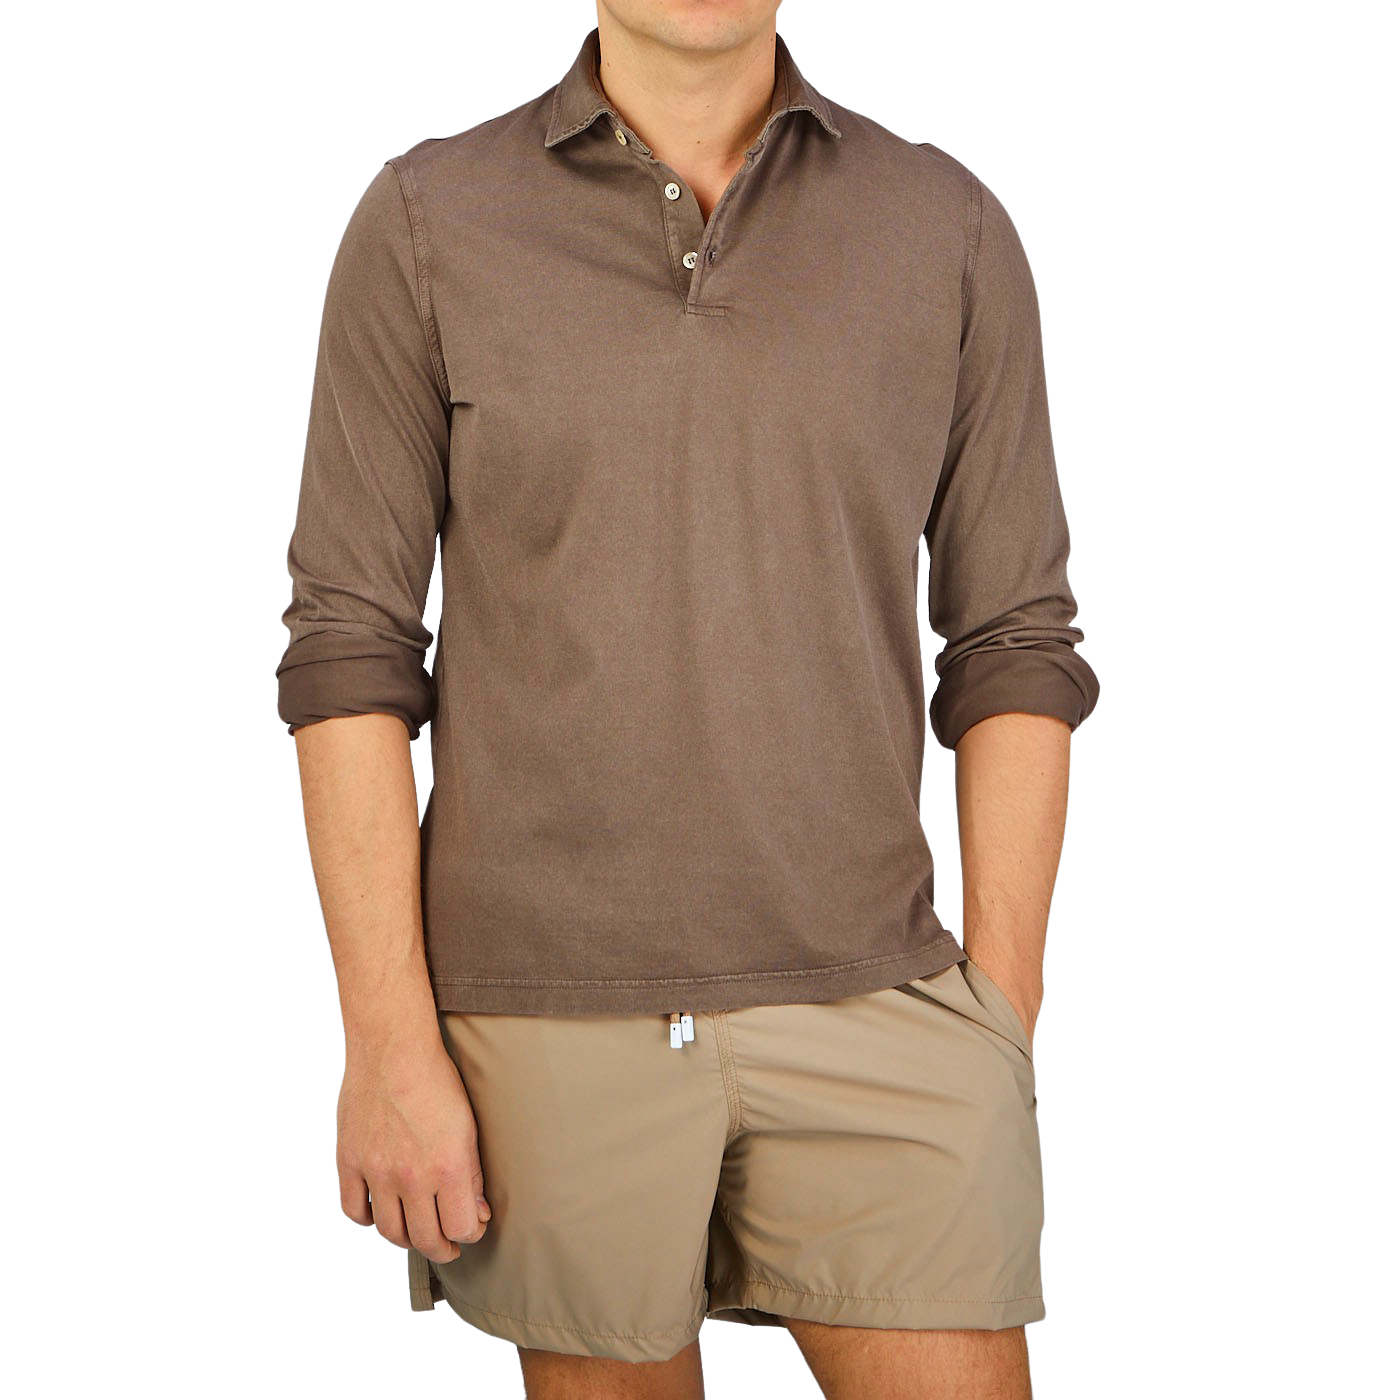 A man wearing a luxury Fedeli Washed Brown Organic Cotton LS Polo Shirt.